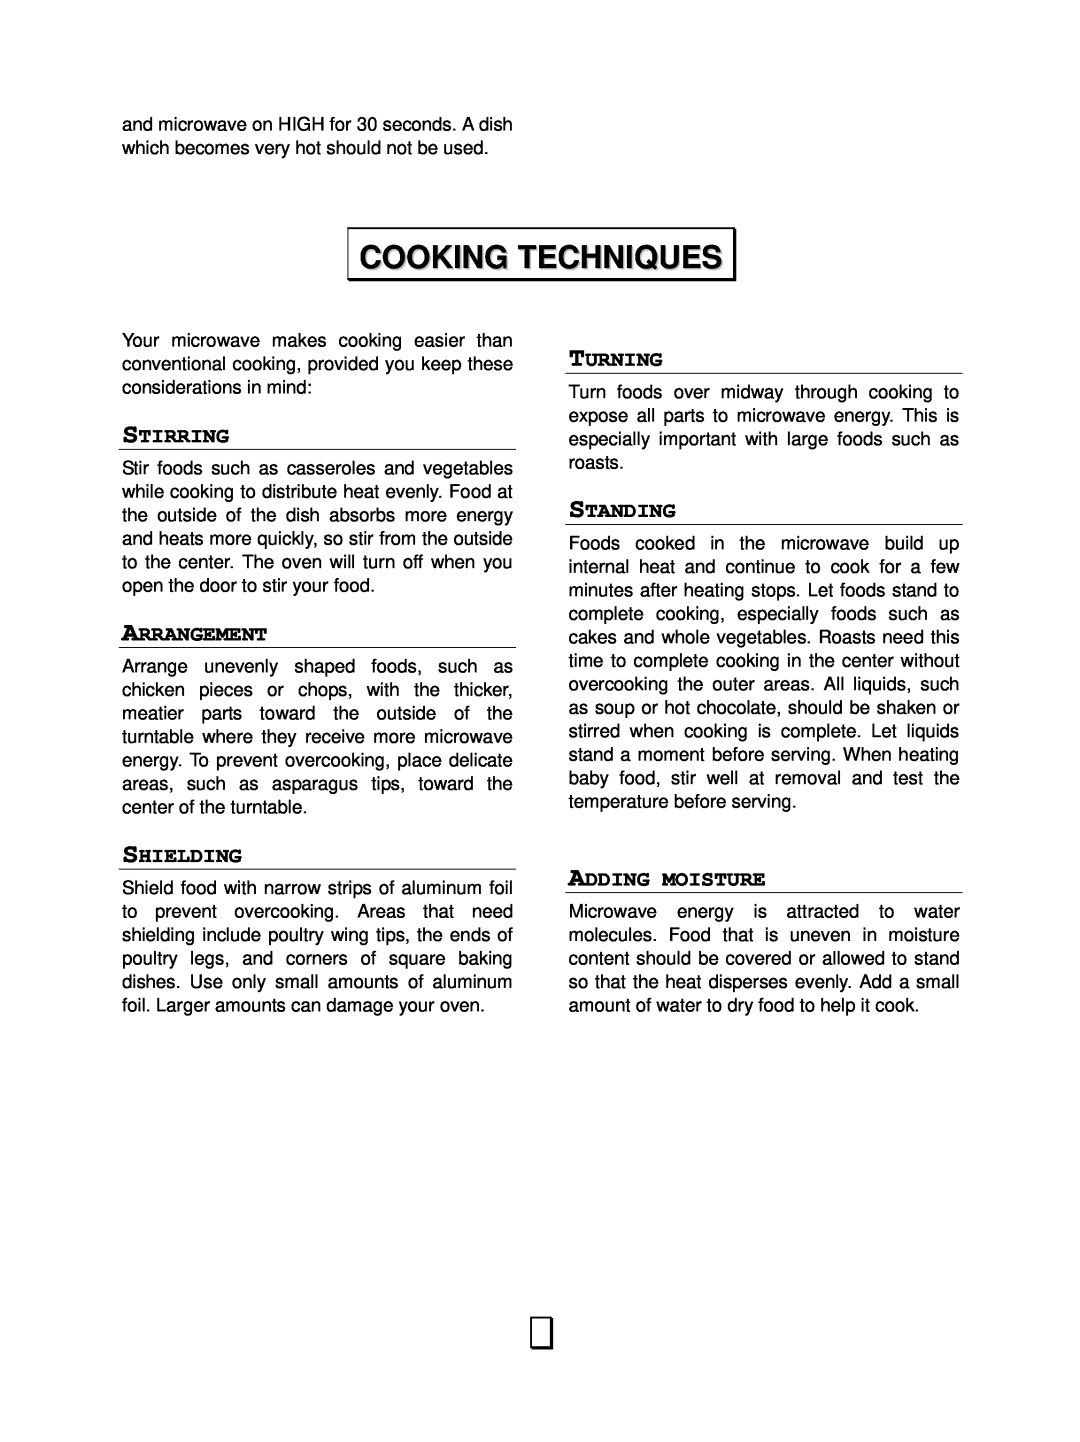 RCA RMW1143 owner manual Cooking Techniques, Stirring, Arrangement, Shielding, Turning, Standing, Adding Moisture 